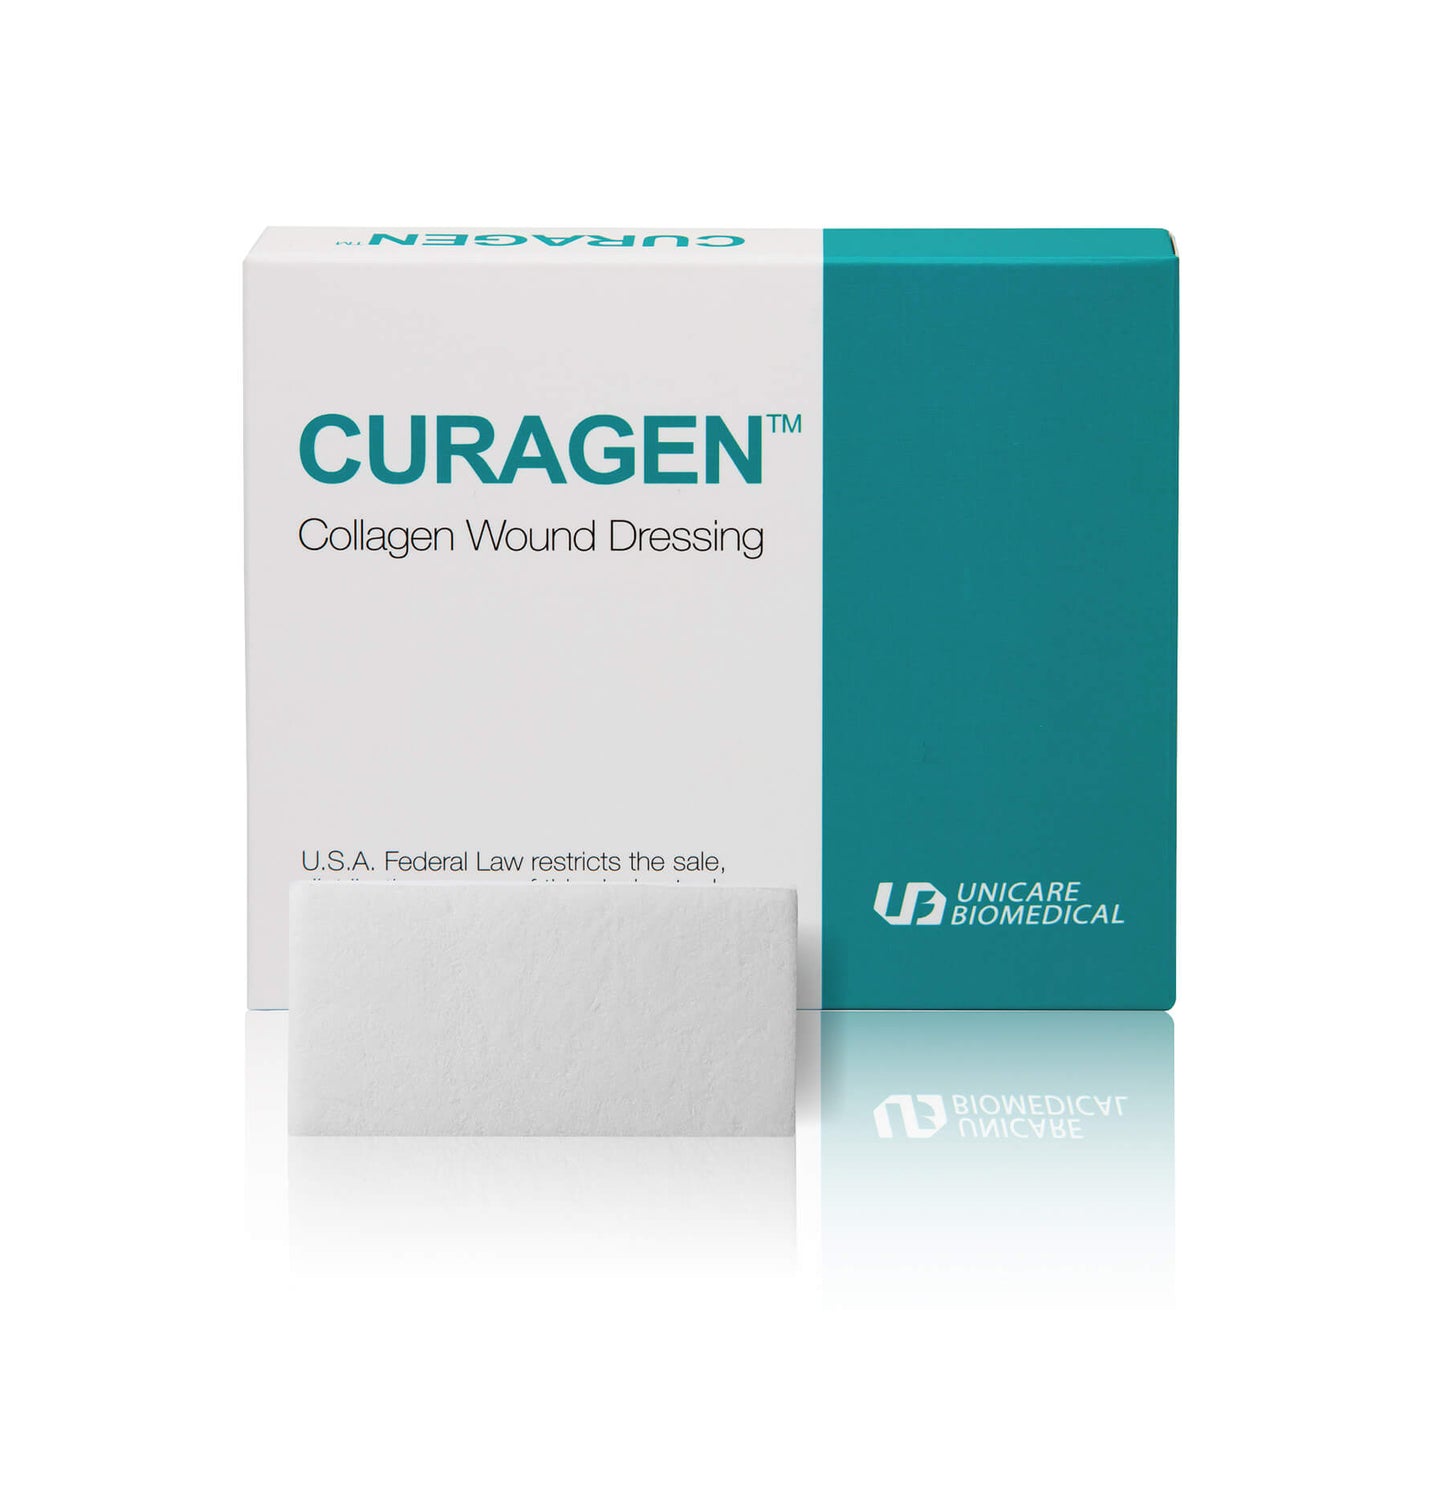 Collagen wound dressing with 1 sheet in front of packaging.